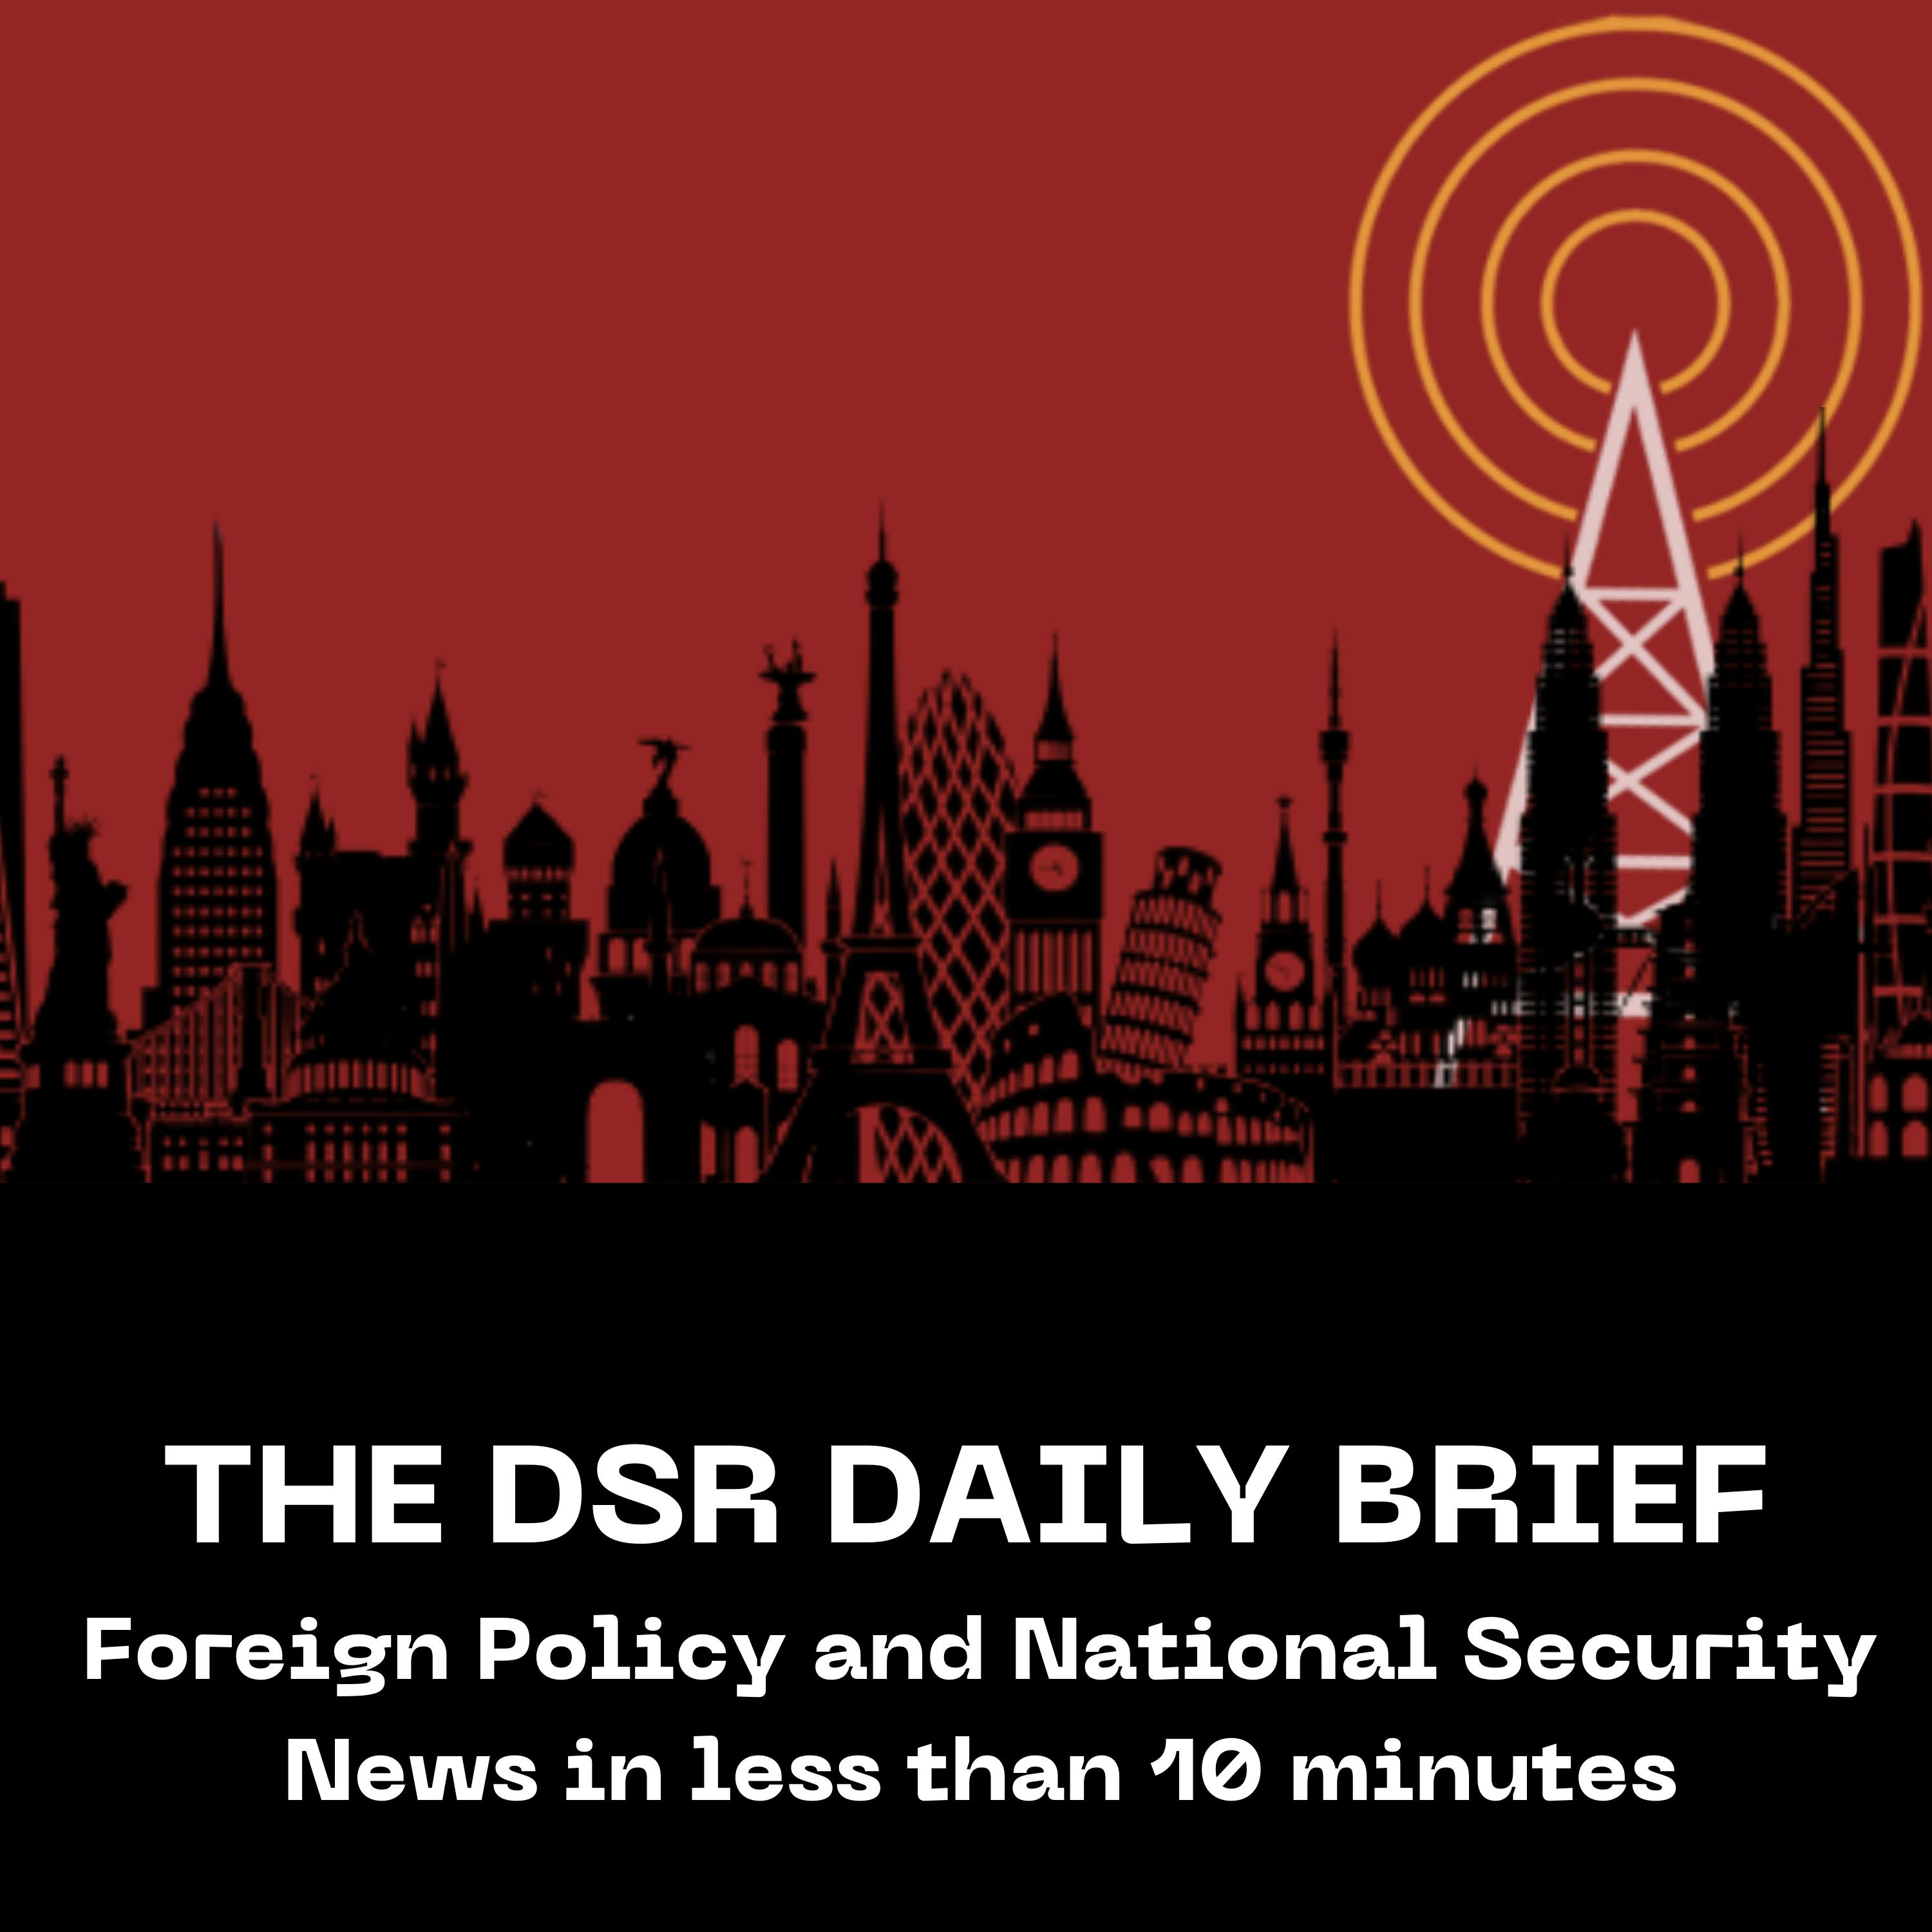 The DSR Daily for March 21: Congress Releases $1.1 Trillion Spending Package, Ireland’s PM Resigns